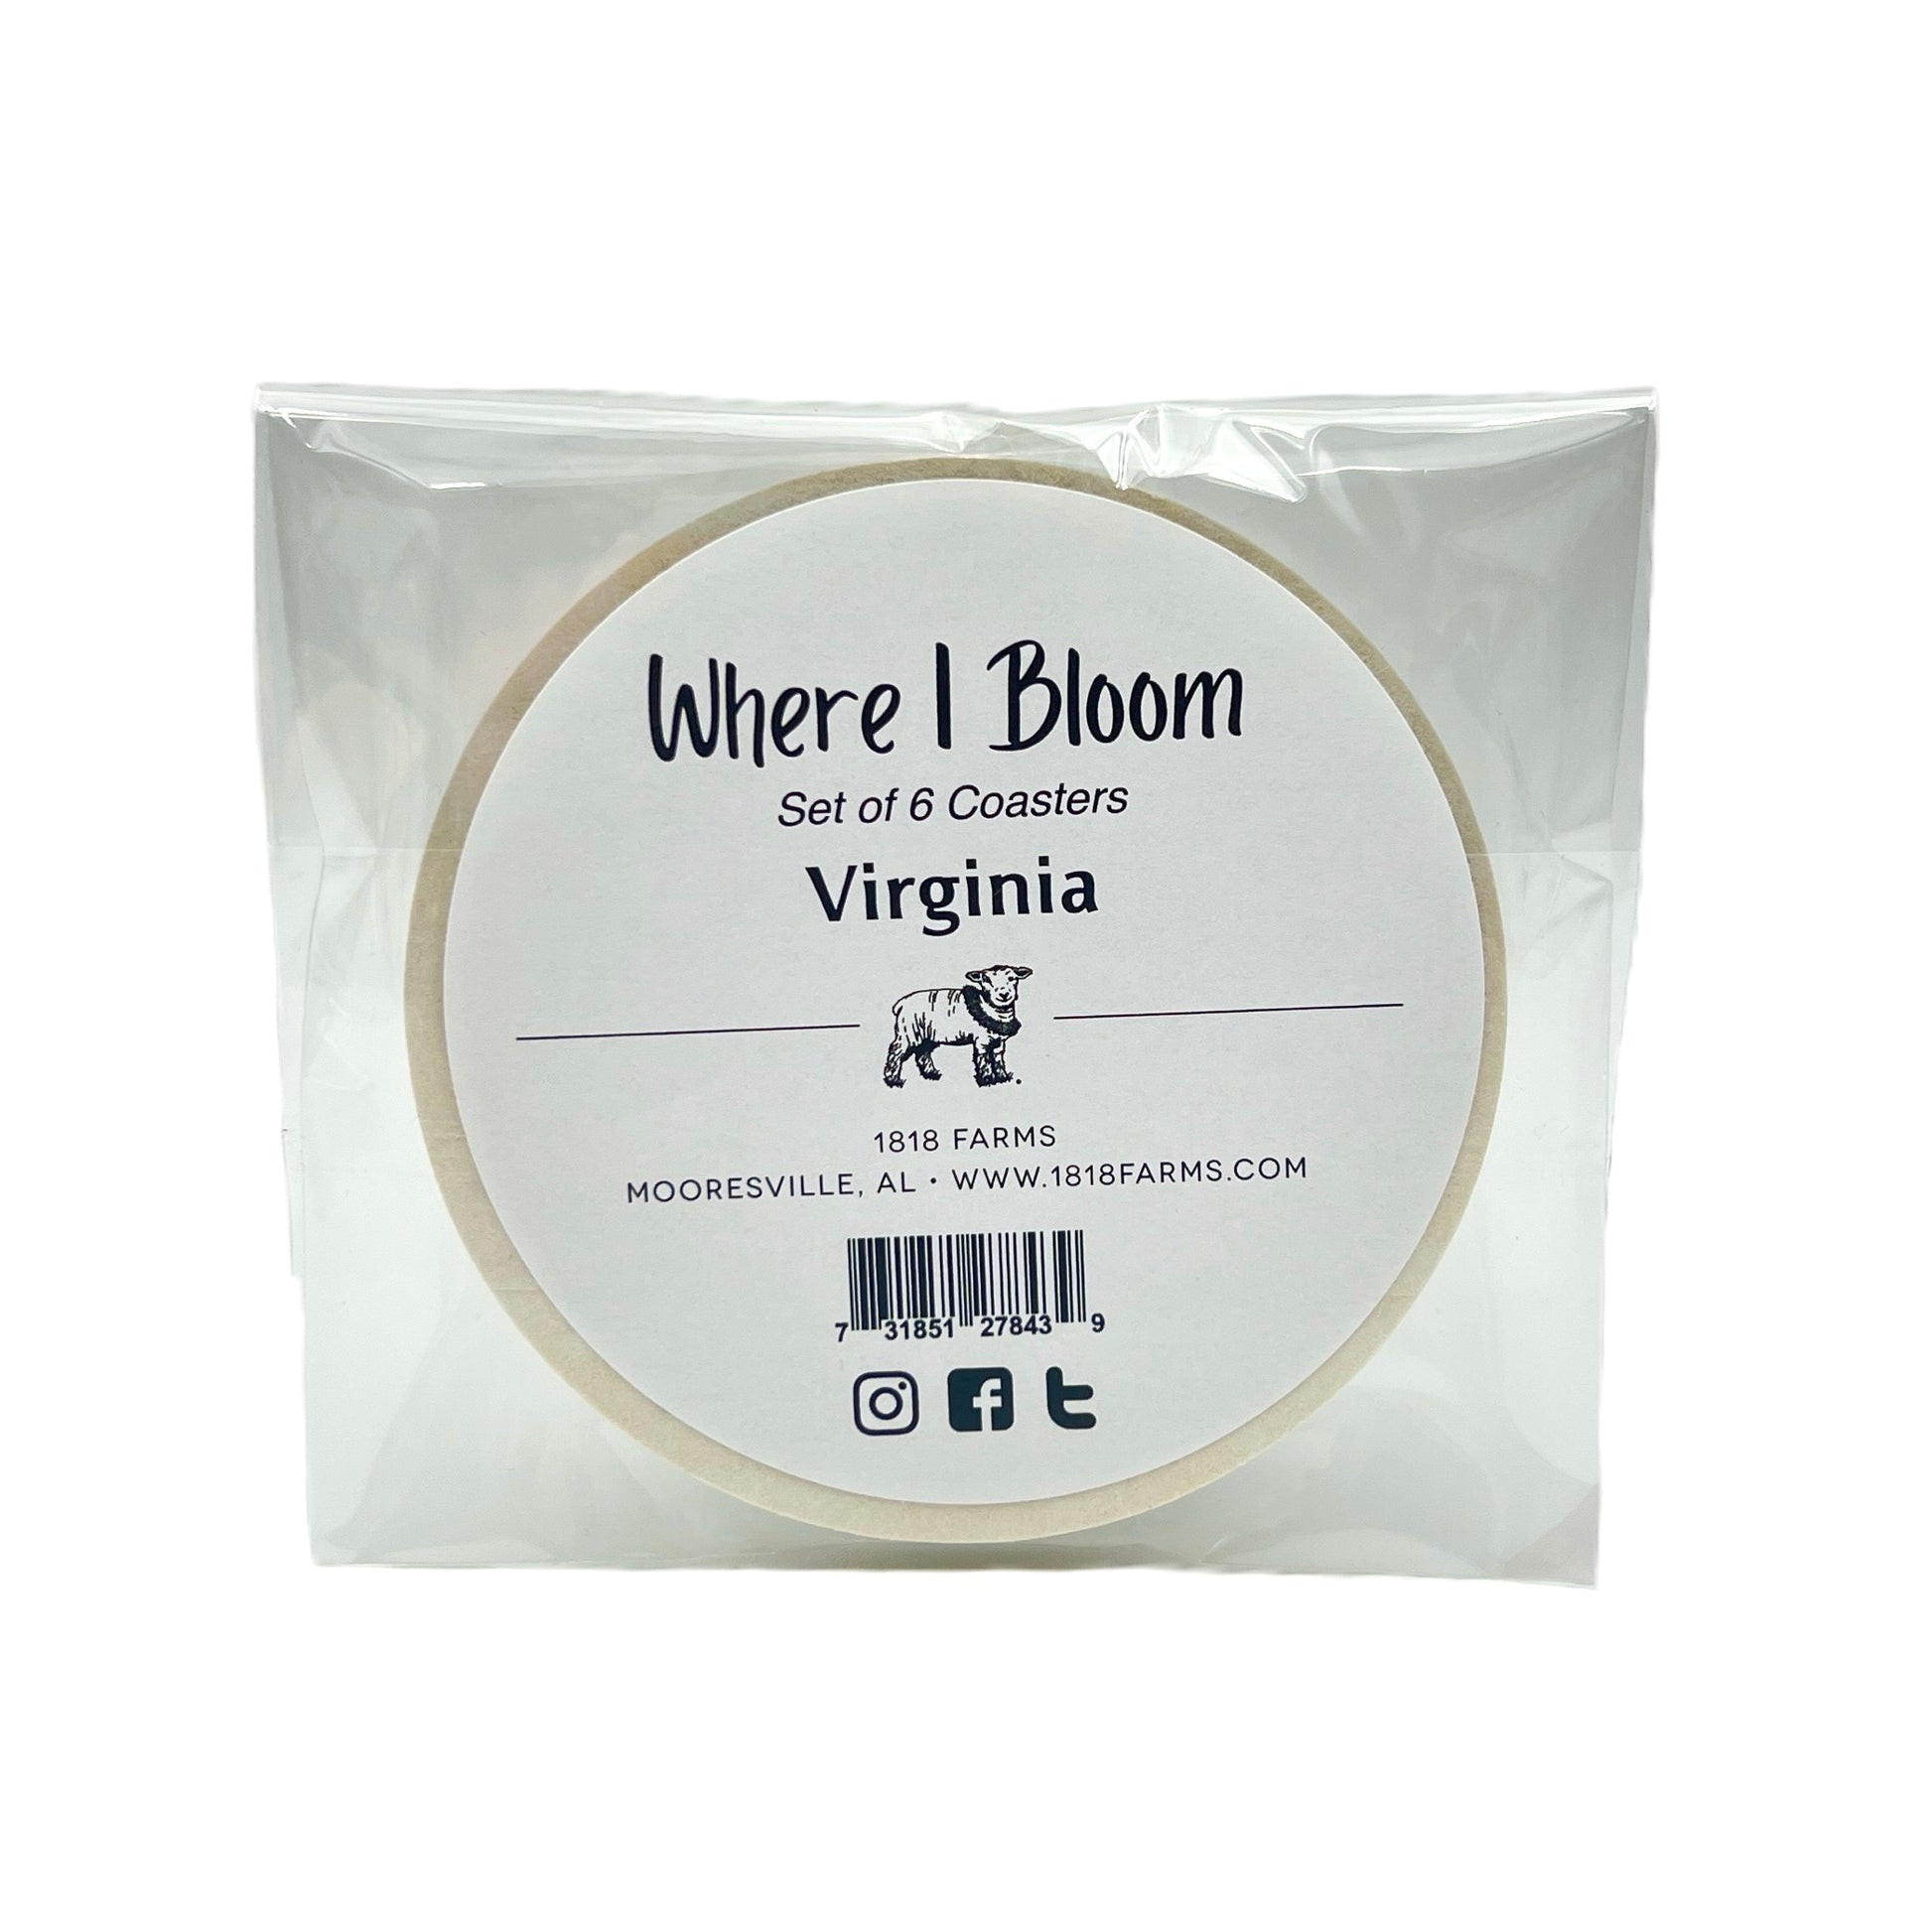 Virginia Themed Coasters (Set of 6)  - "Where I Bloom" Collection Coaster 1818 Farms   